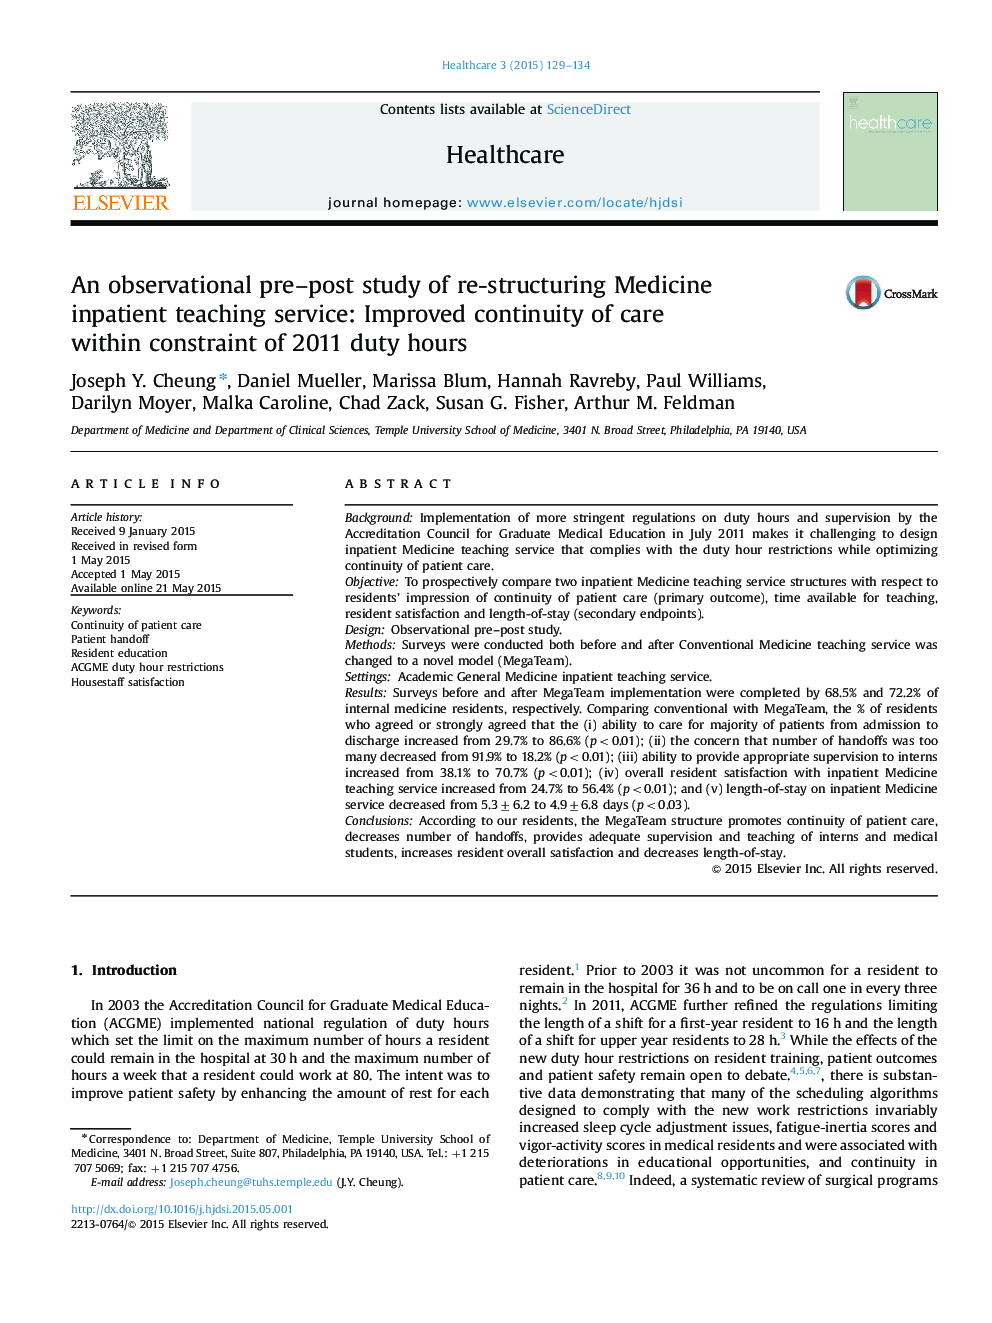 An observational pre-post study of re-structuring Medicine inpatient teaching service: Improved continuity of care within constraint of 2011 duty hours